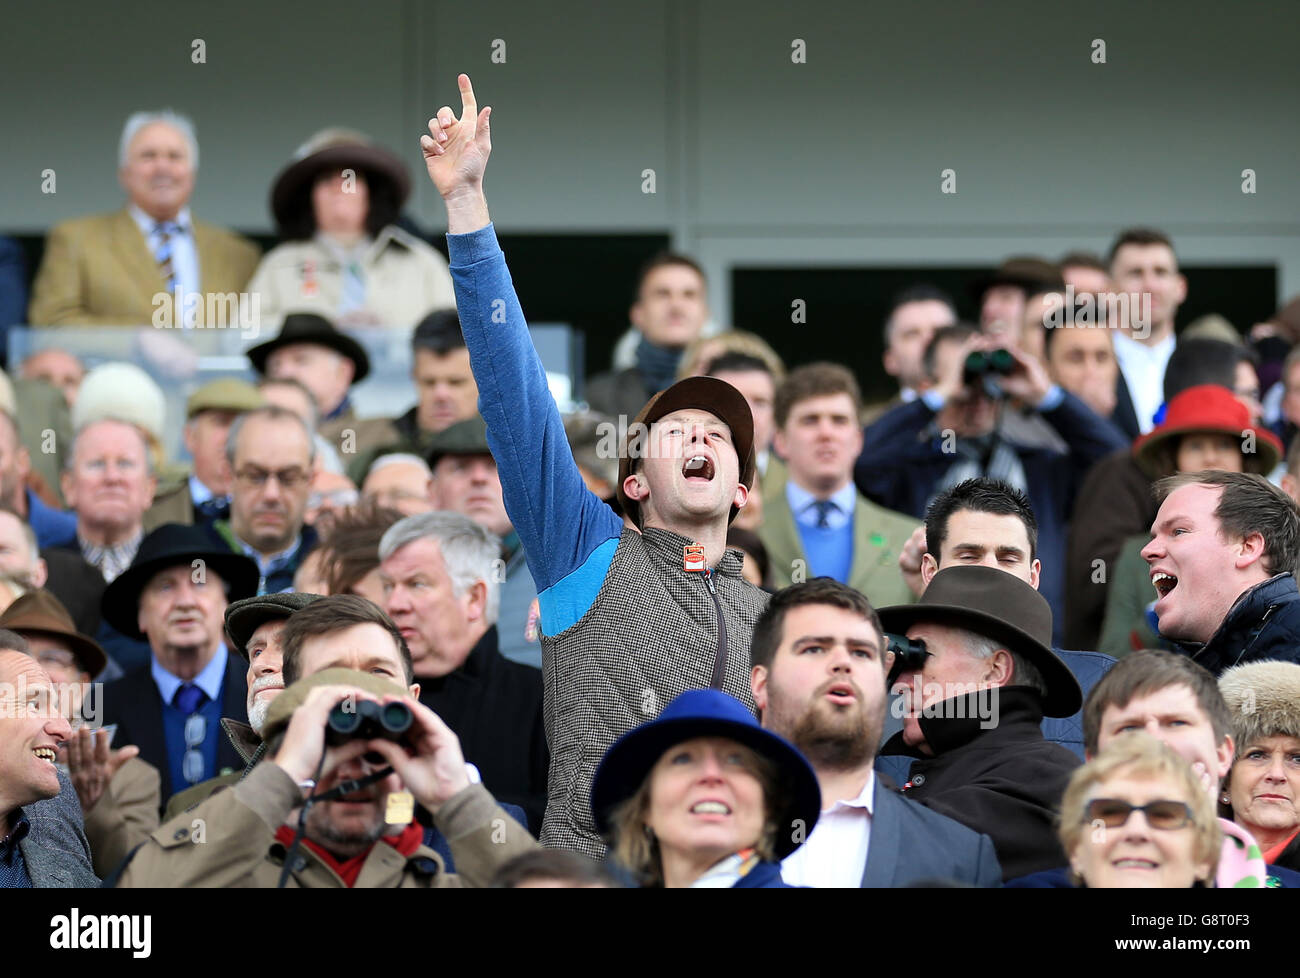 A racegoer cheers in the crowd during Ladies Day at the 2016 Cheltenham Festival at Cheltenham Racecourse. Stock Photo